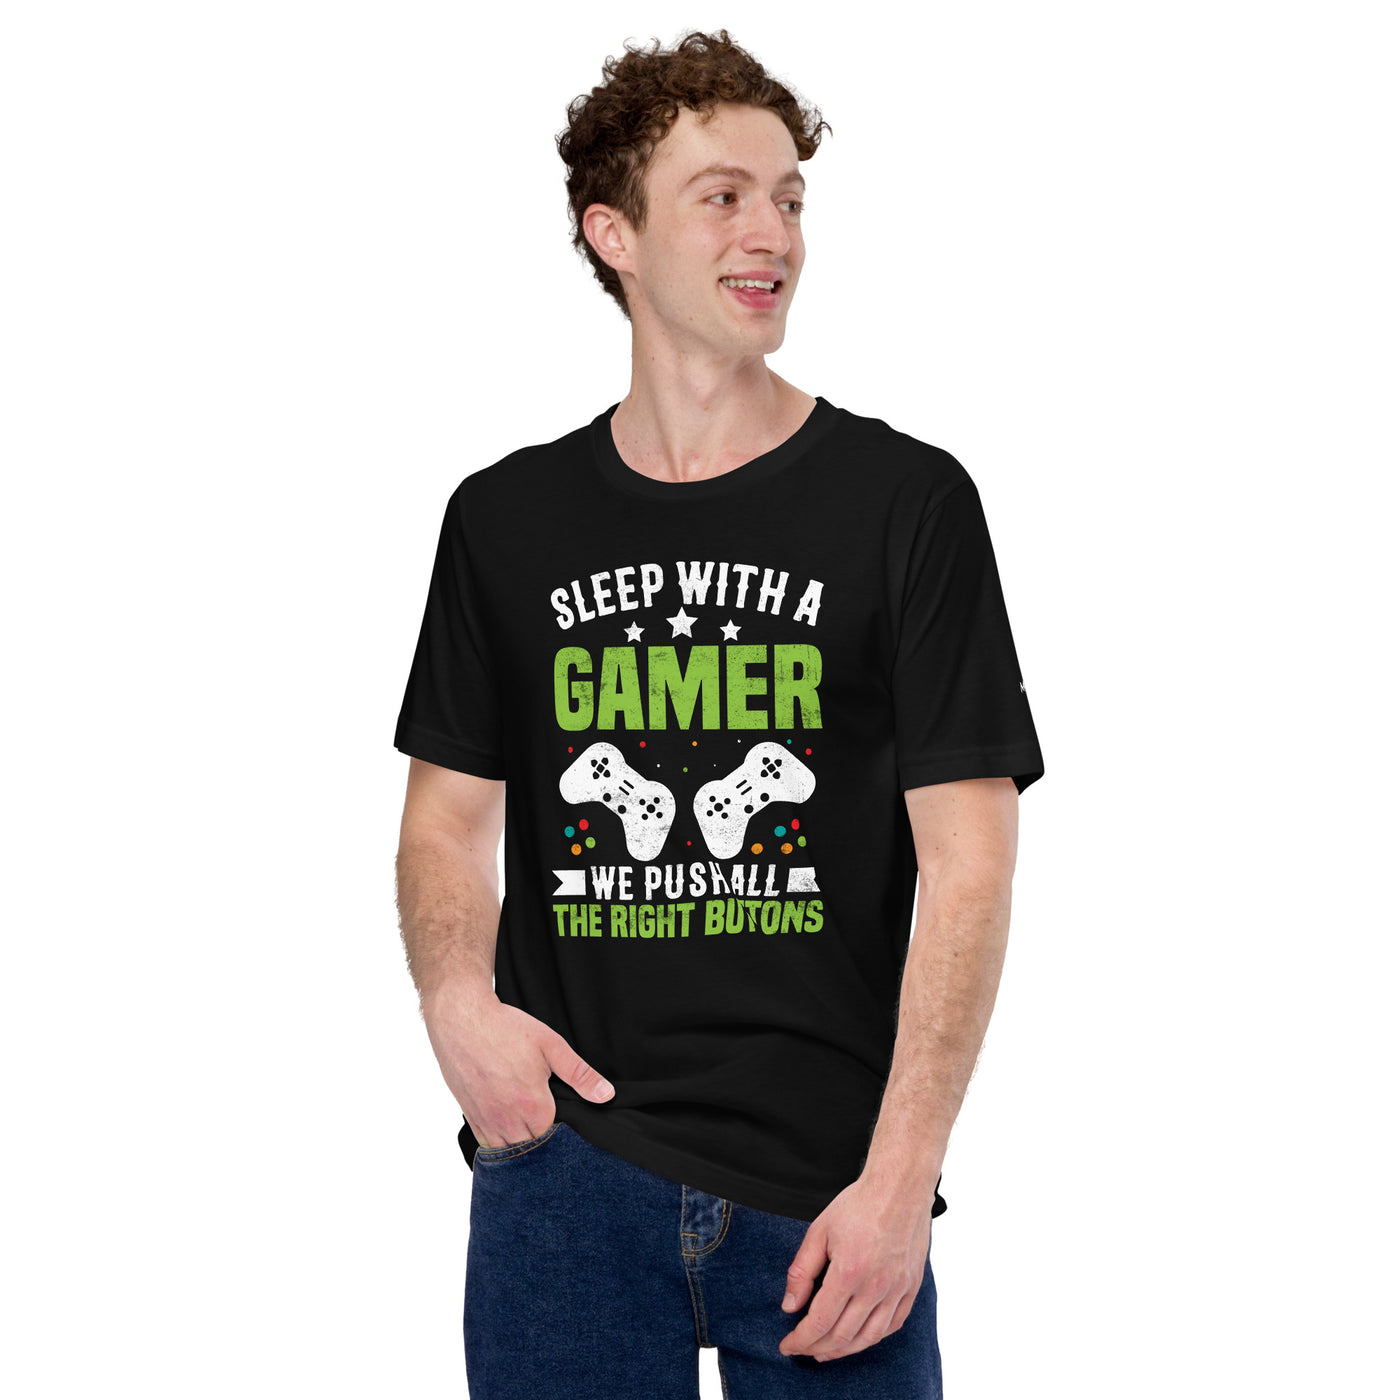 Sleep With a Gamer, We Push all the Right Button Unisex t-shirt